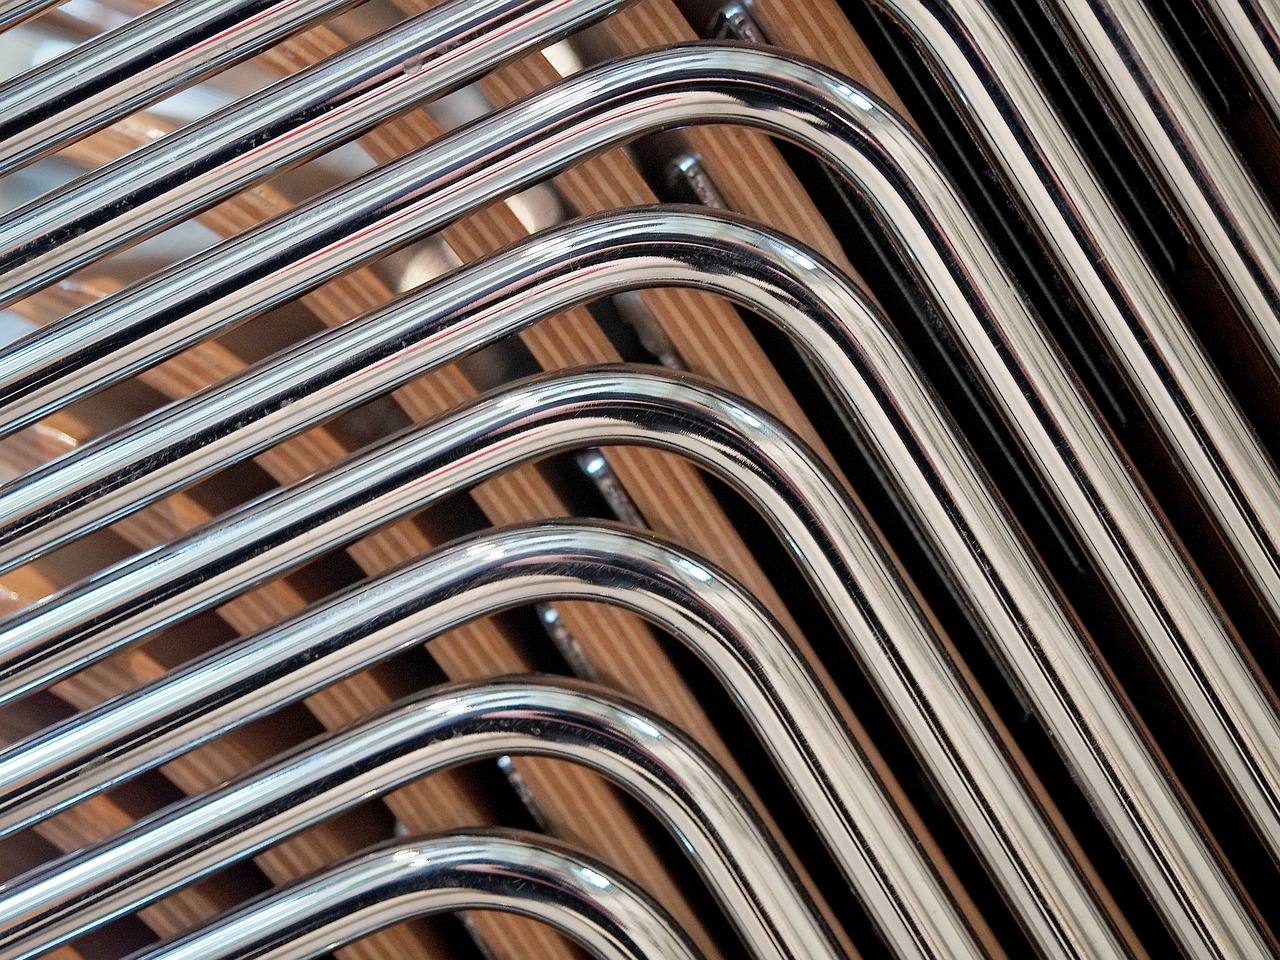 Close up of bended stainless steel tubes from chairs stacked in a pile